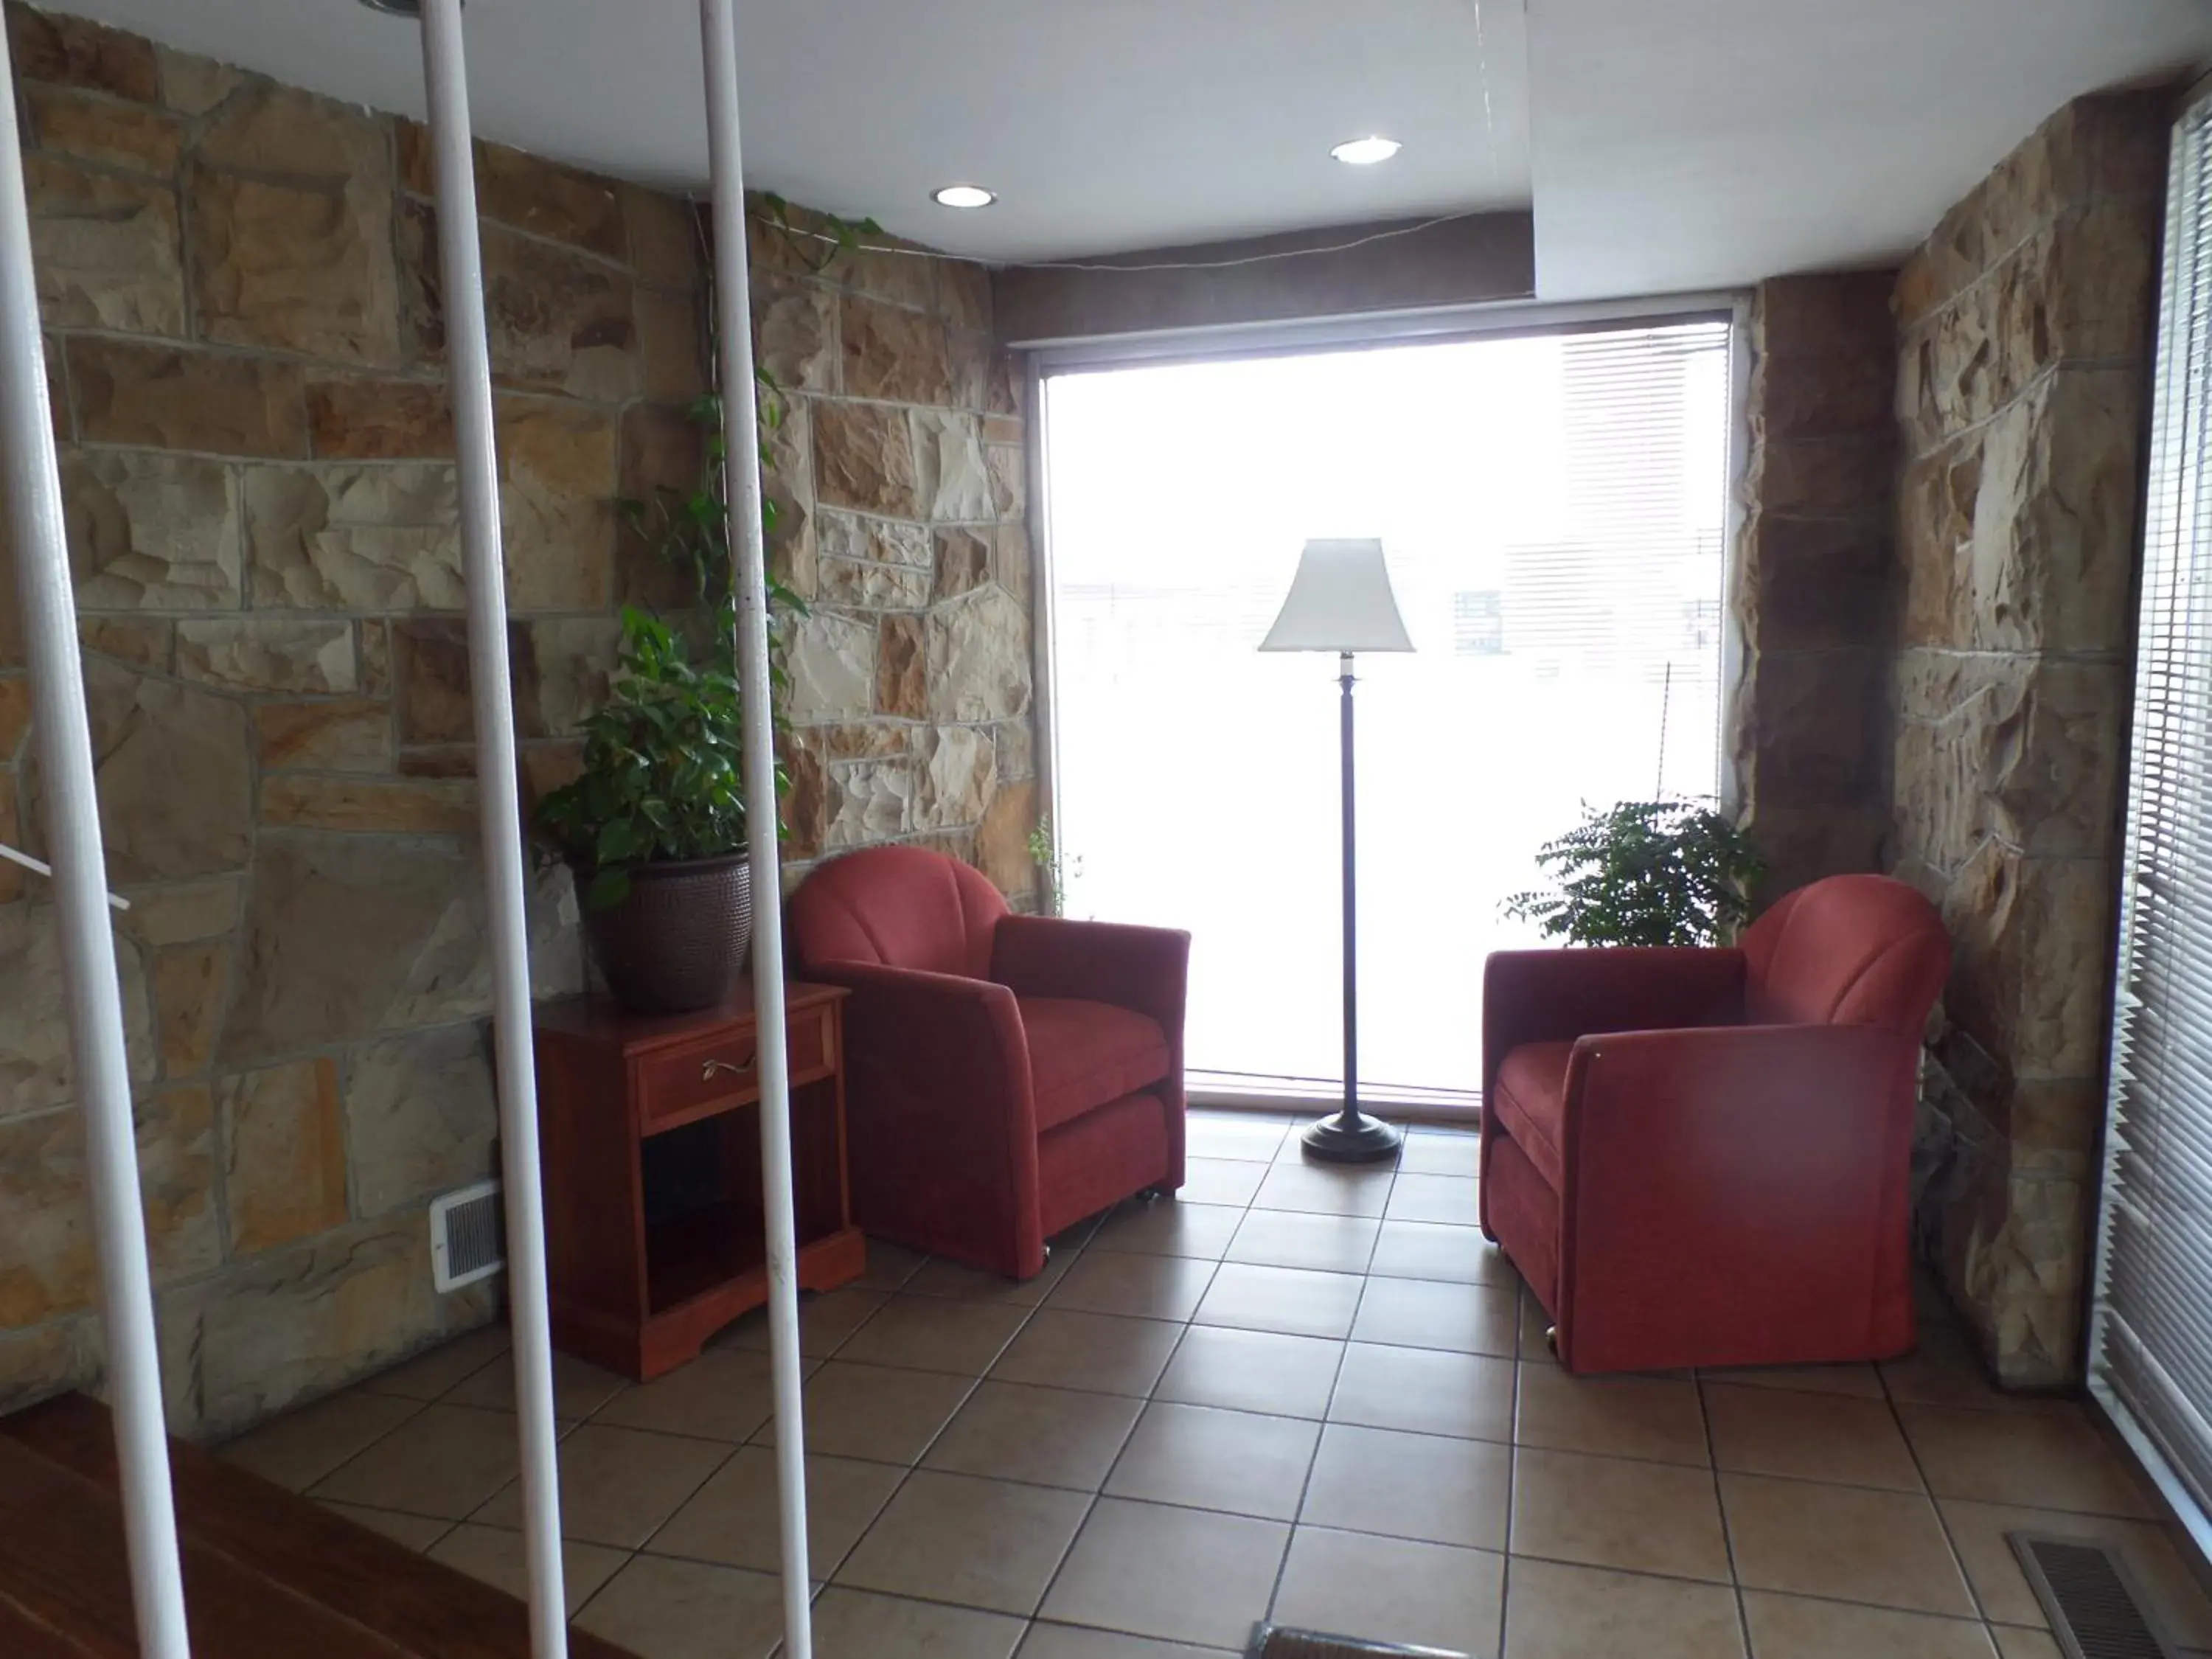 Lobby or reception in Executive Inn Chillicothe